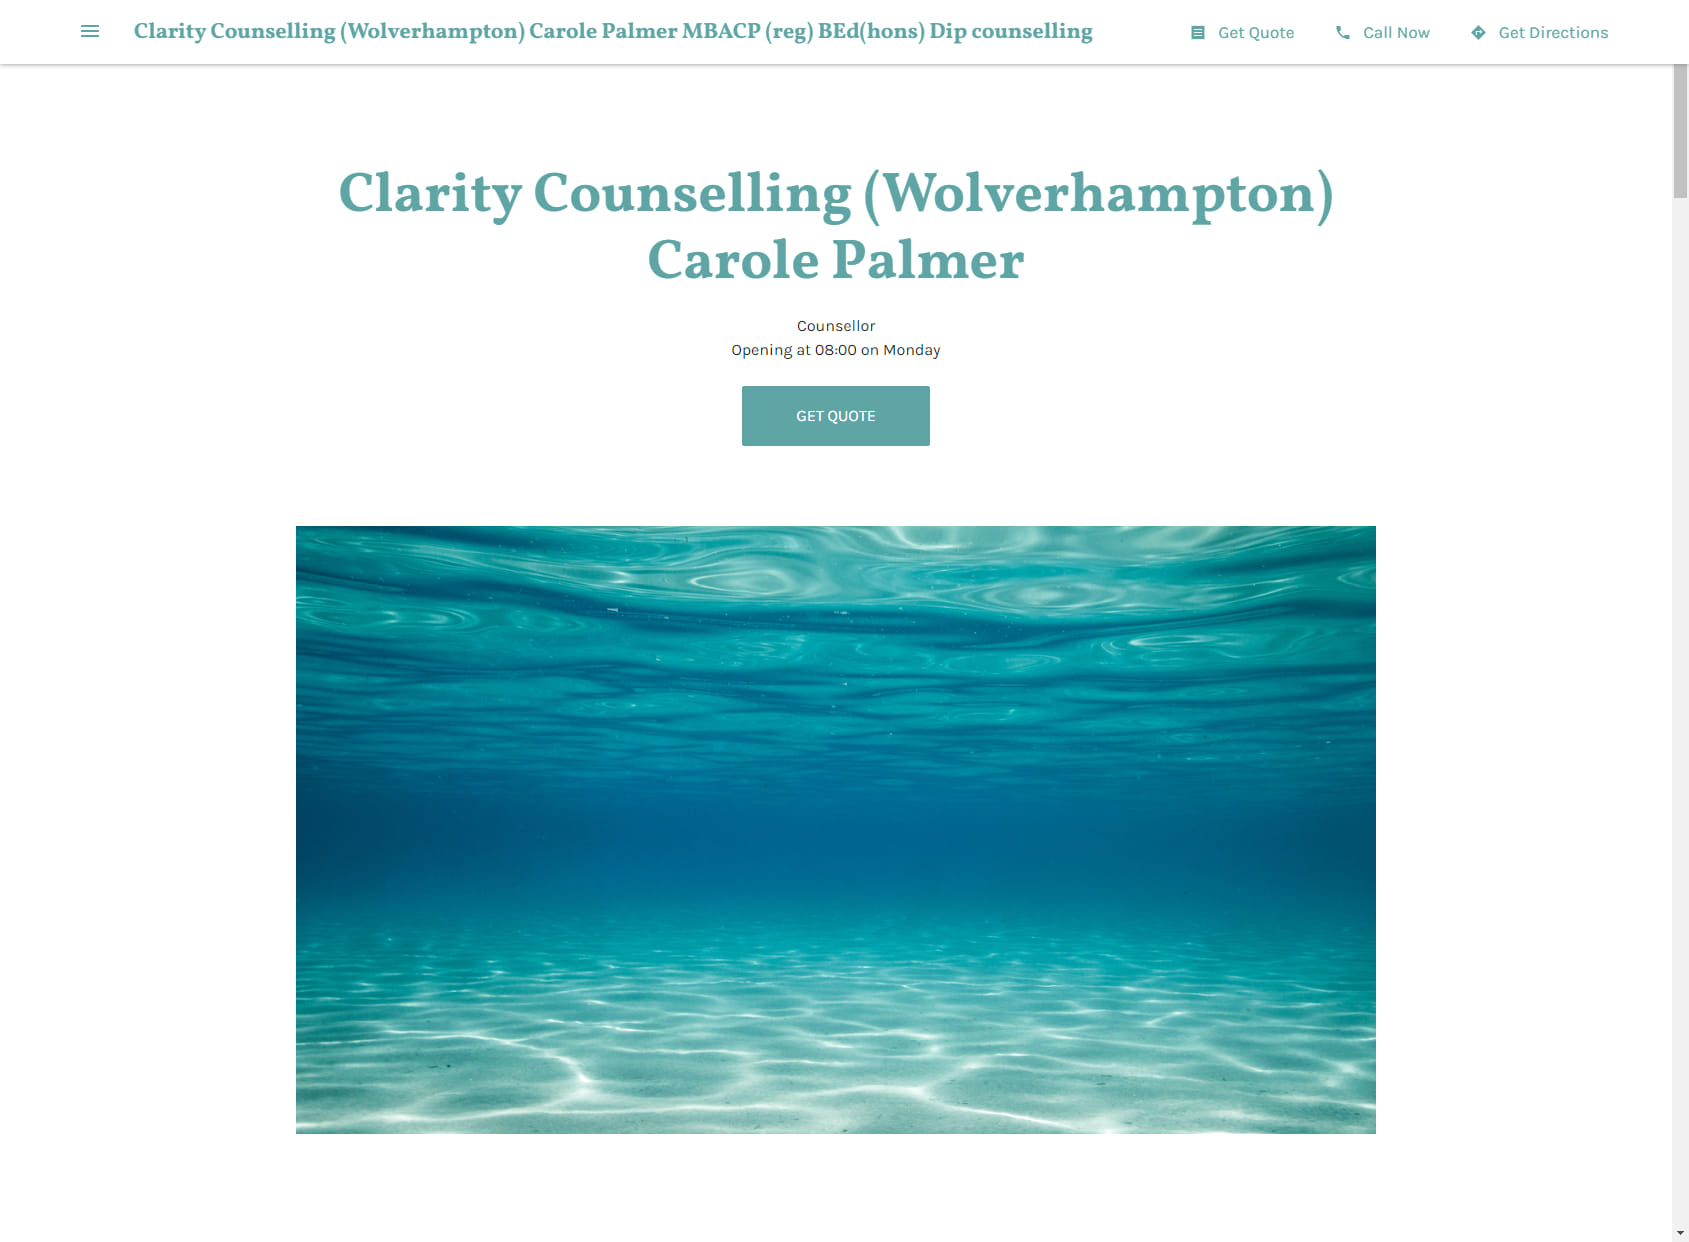 Clarity Counselling (Wolverhampton) Carole Palmer MBACP (reg) BEd(hons) Dip counselling